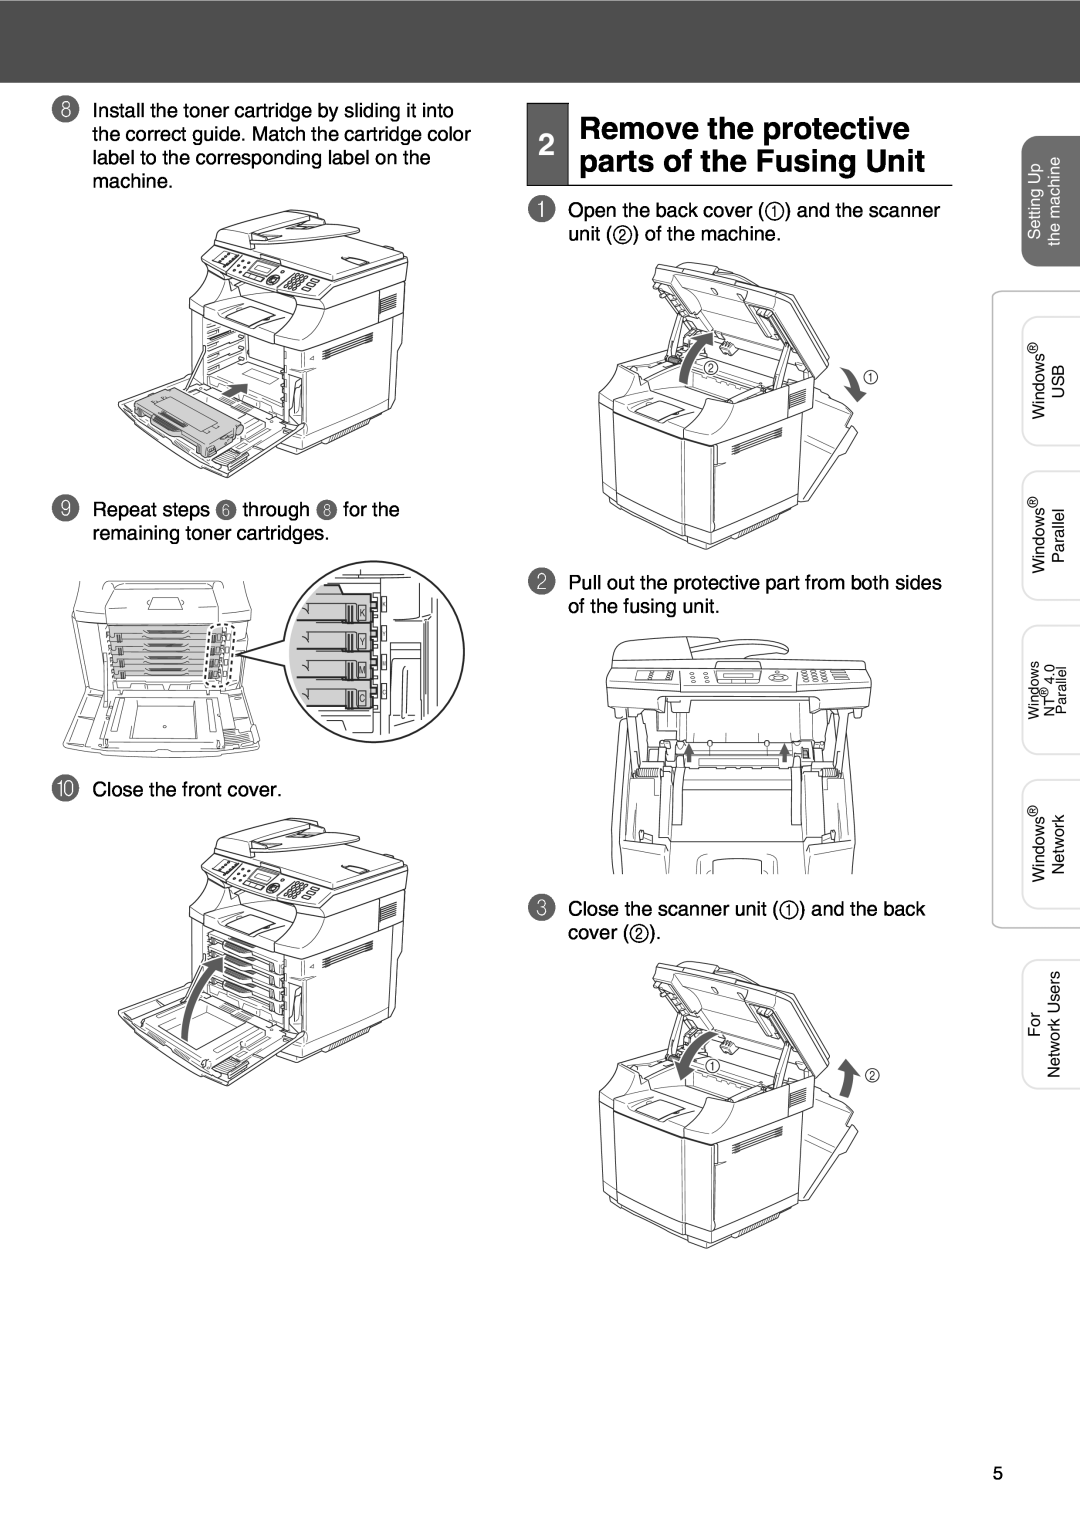 Microsoft SPC210SF setup guide Remove the protective parts of the Fusing Unit 